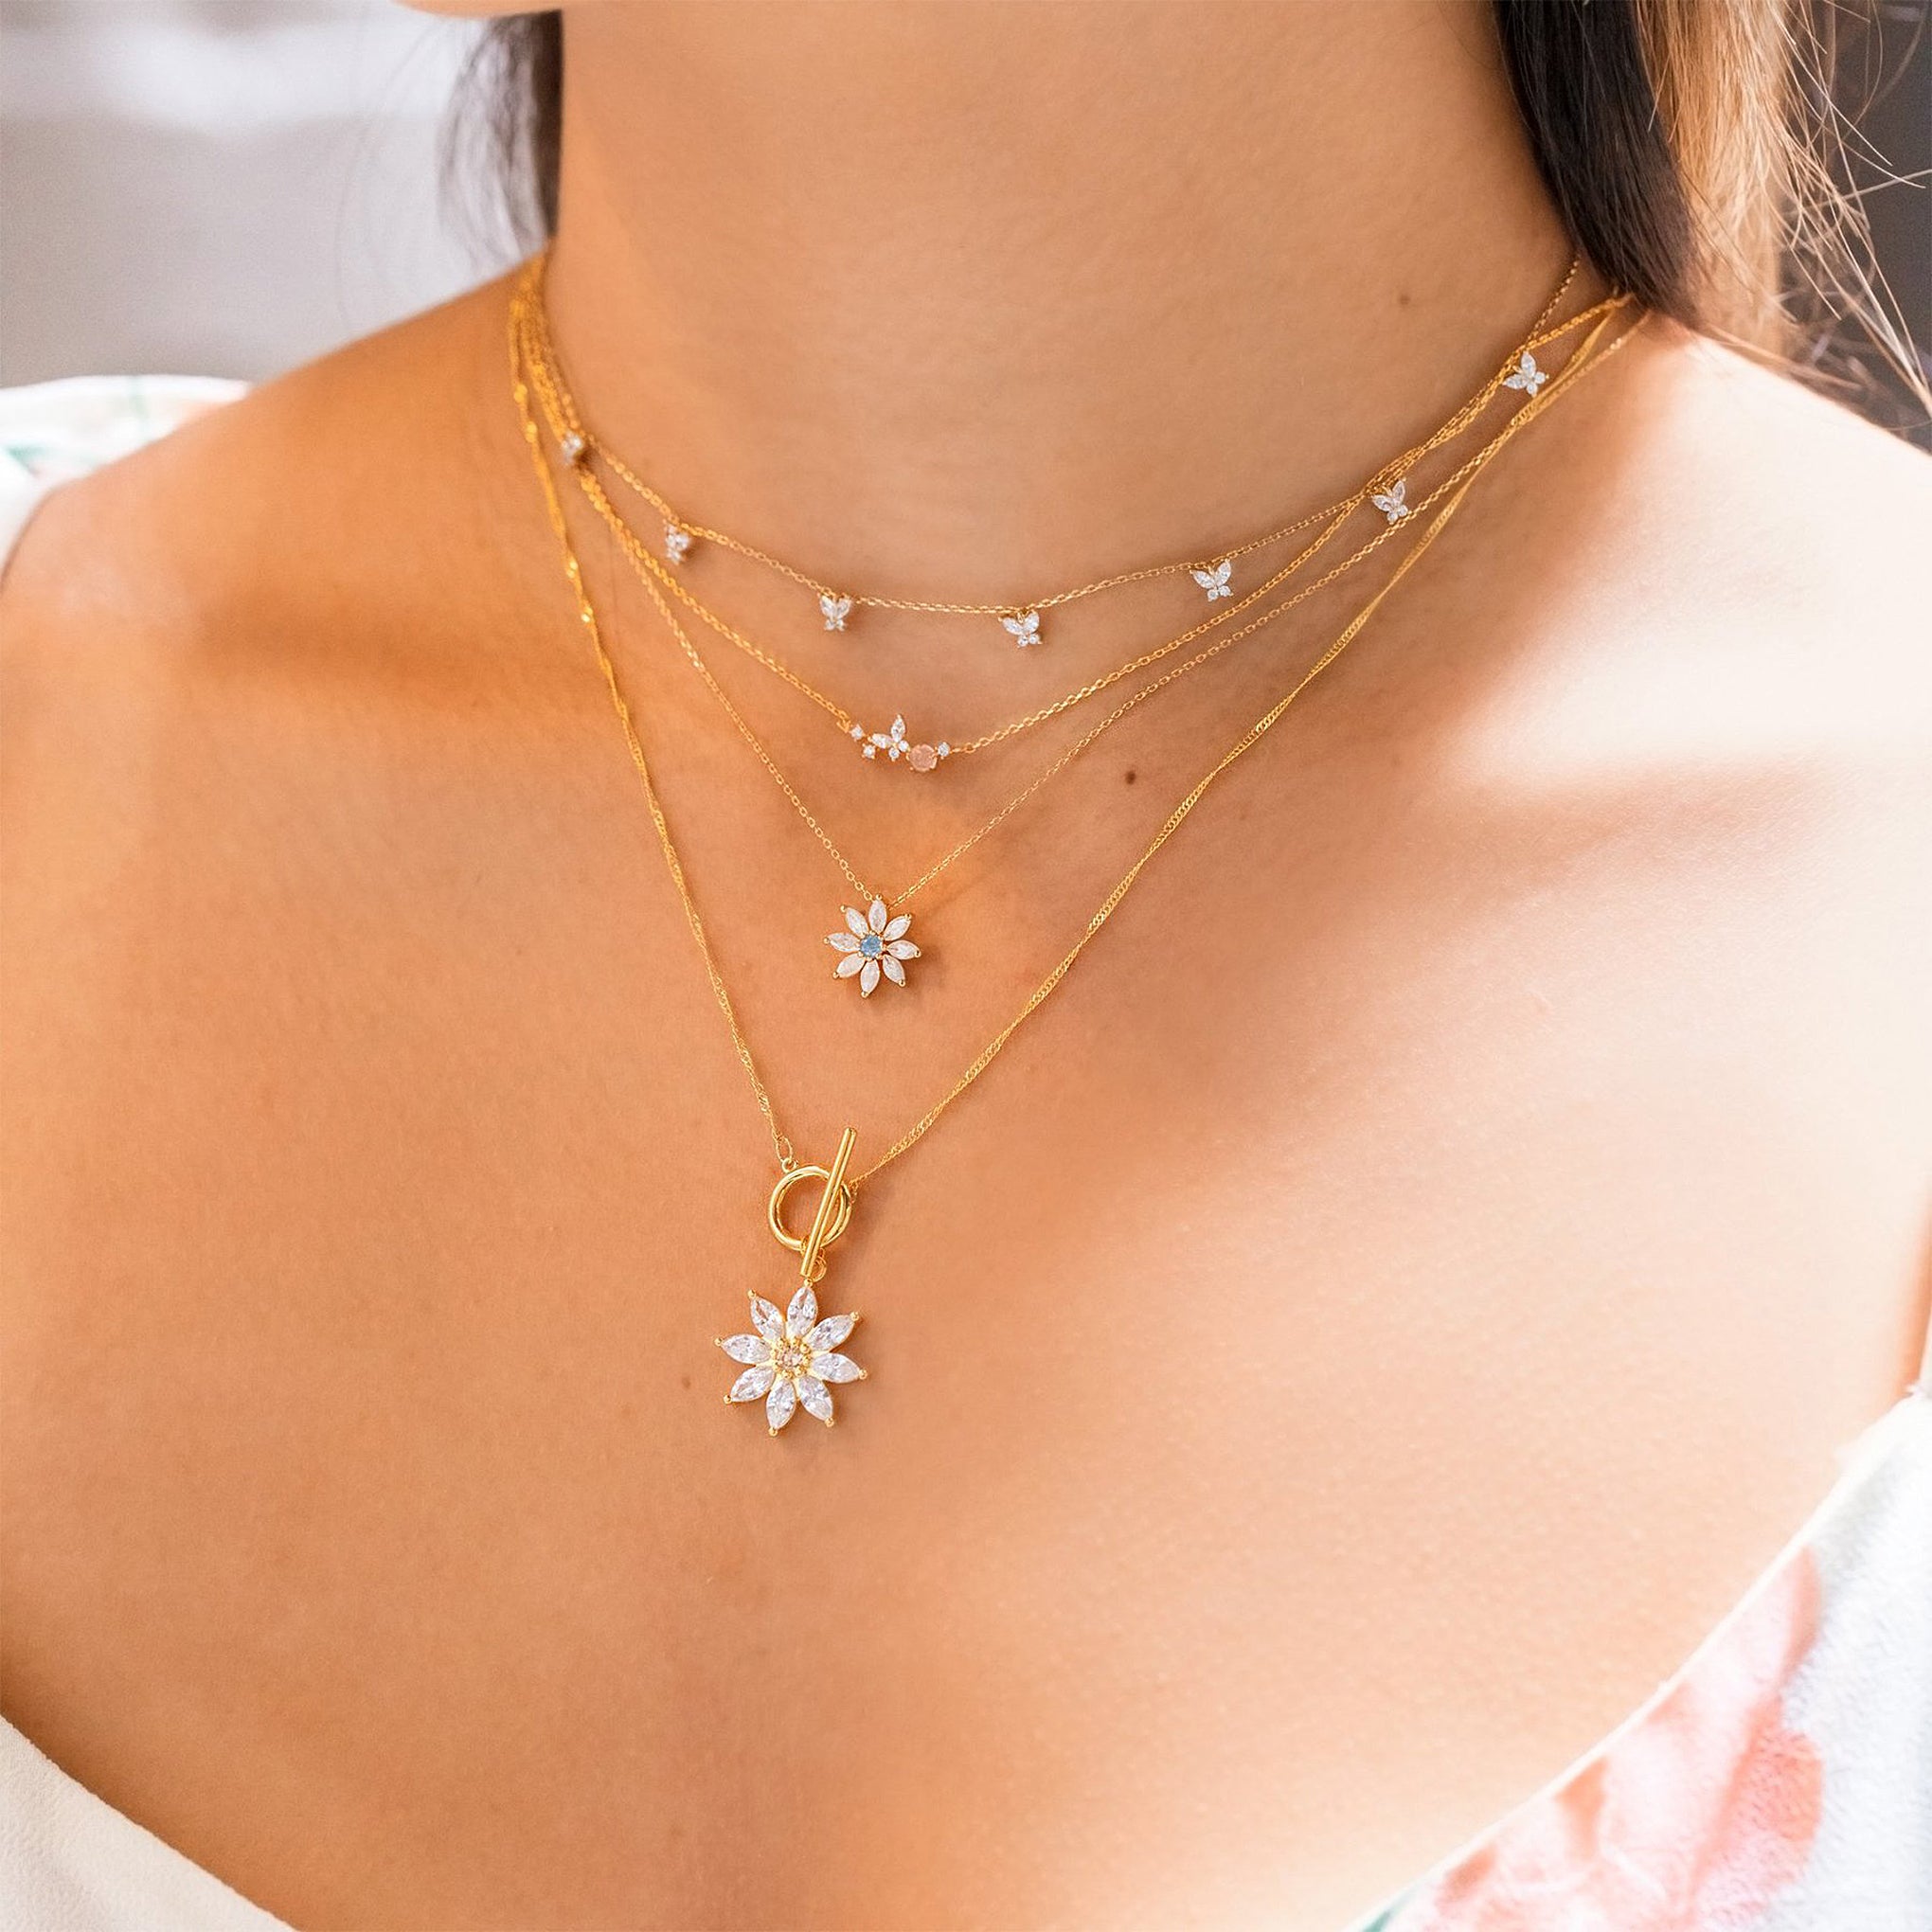 Girls Crew Mari Mini Butterfly Multi Charm Choker Necklace in Gold Plated